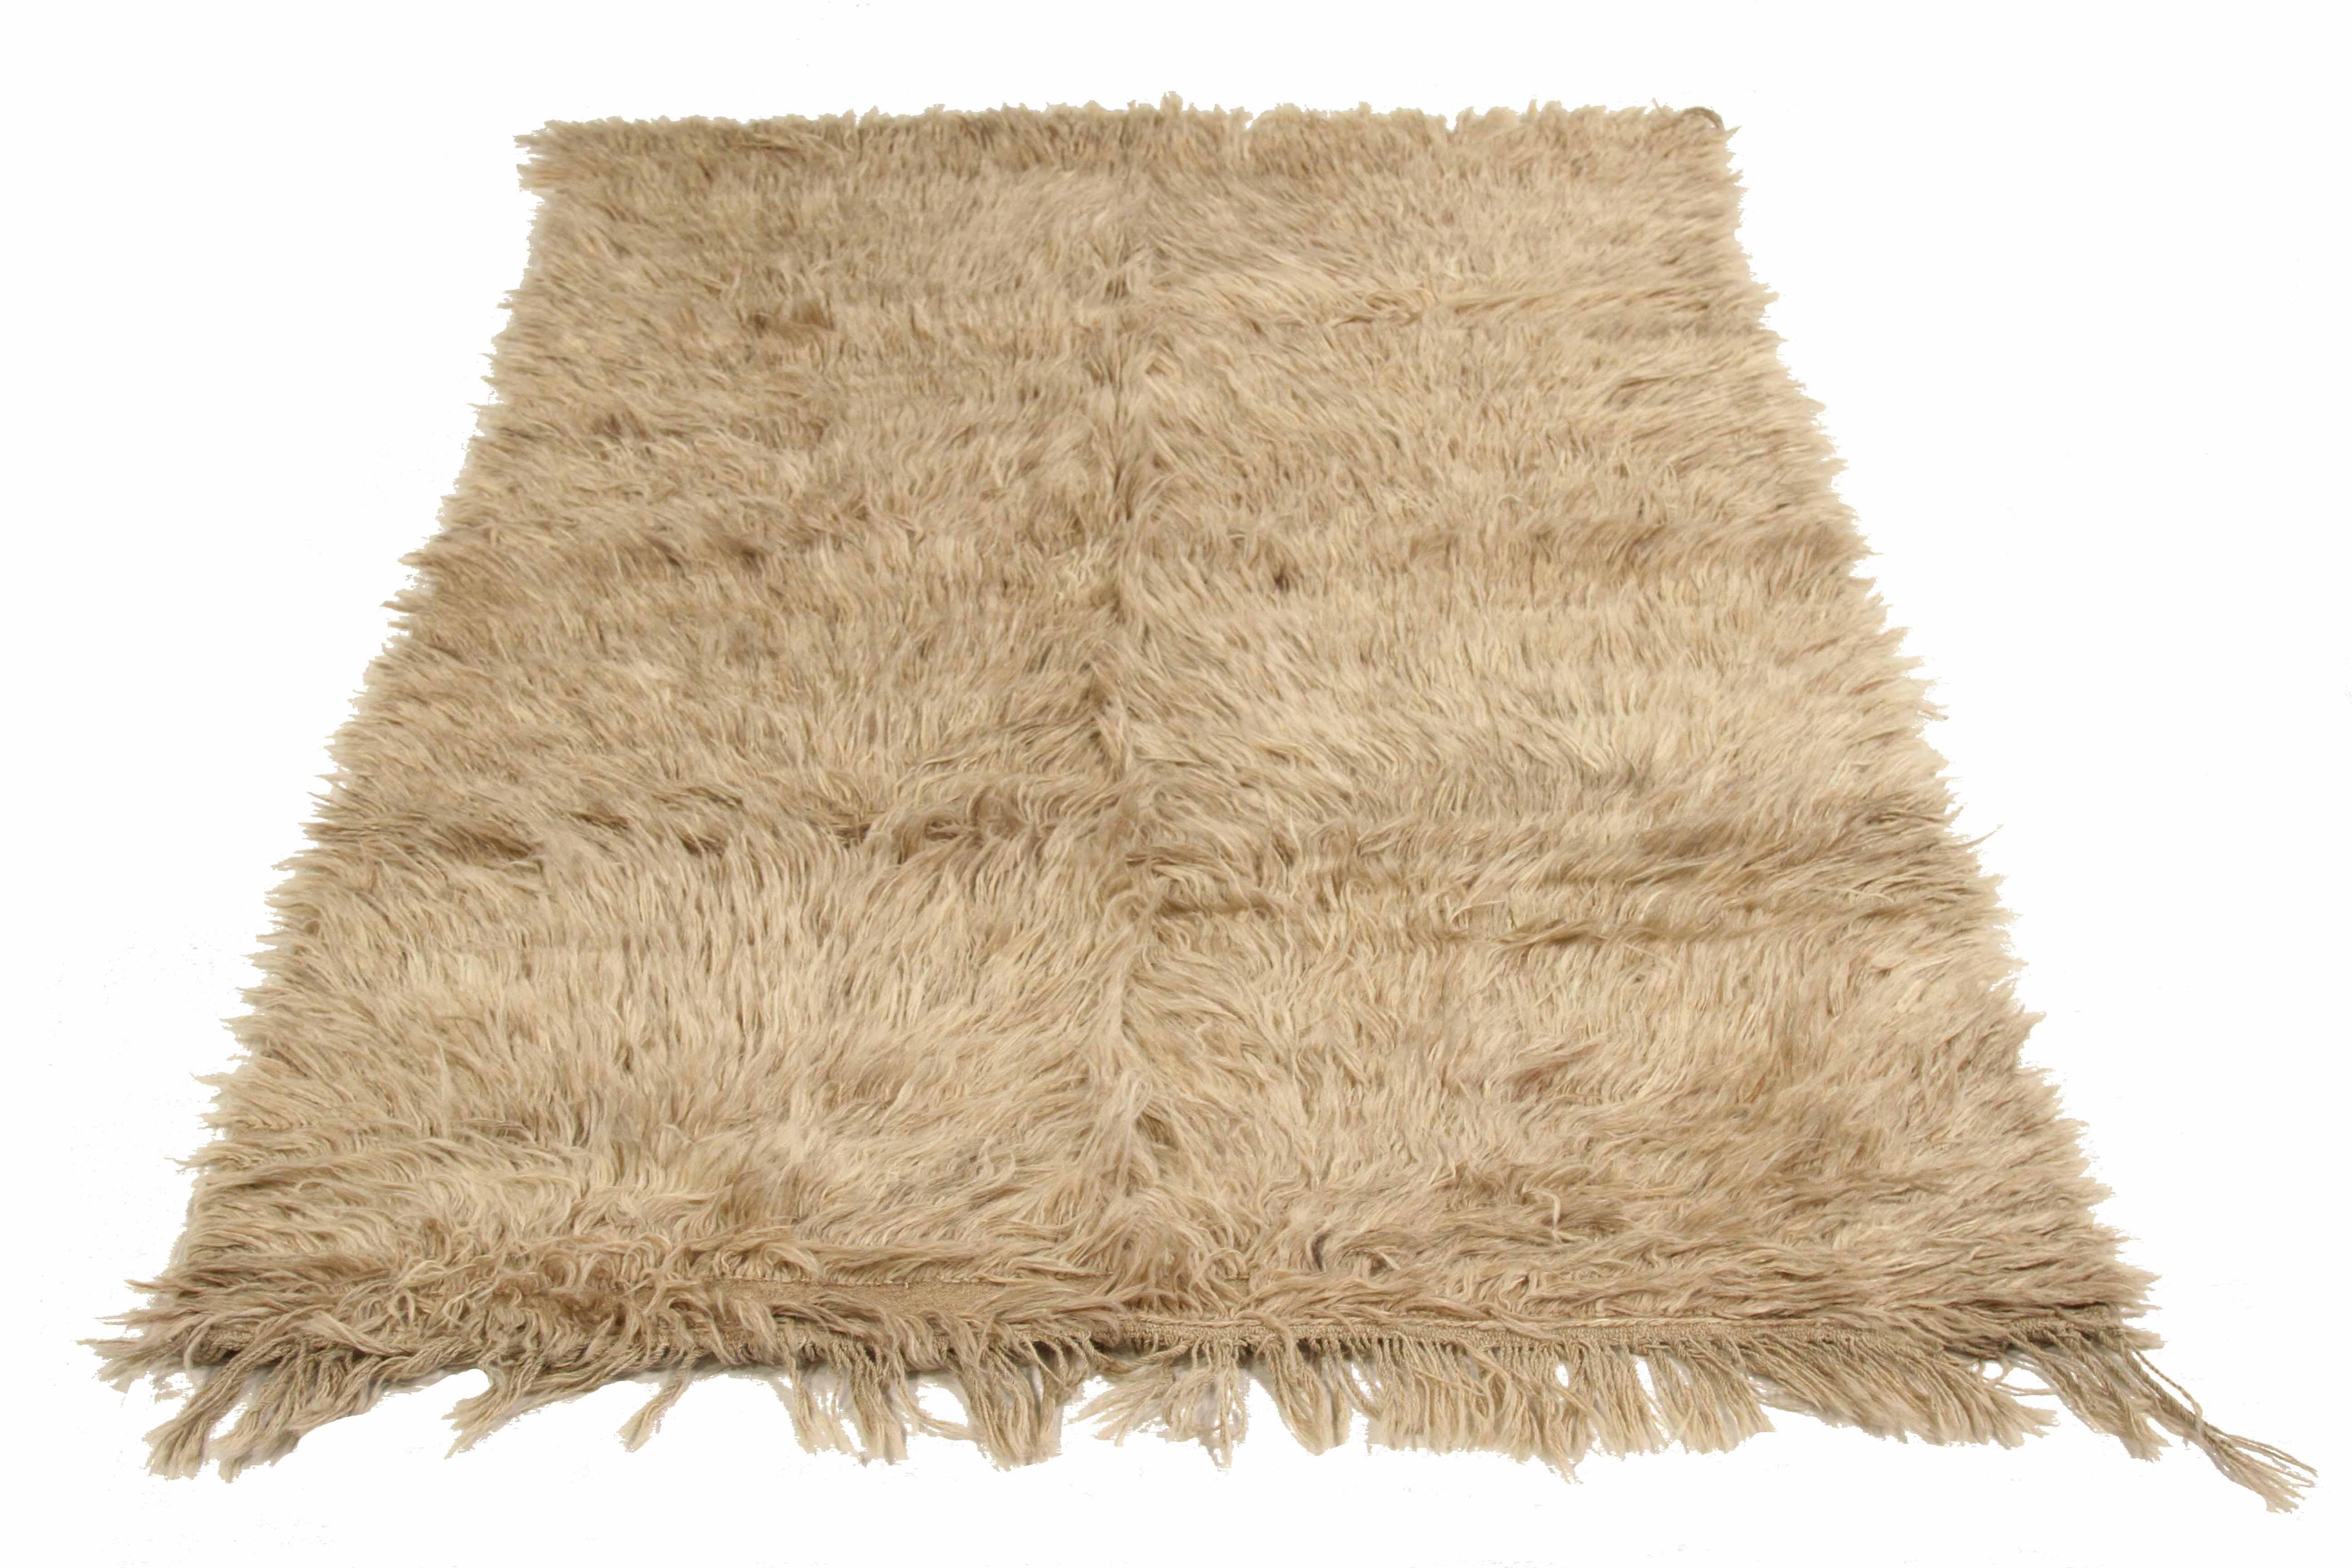 New Turkish area rug handwoven from the finest sheep’s wool. It’s colored with all-natural vegetable dyes that are safe for humans and pets. It’s a traditional Tulu design handwoven by expert artisans. It’s a lovely area rug that can be incorporated